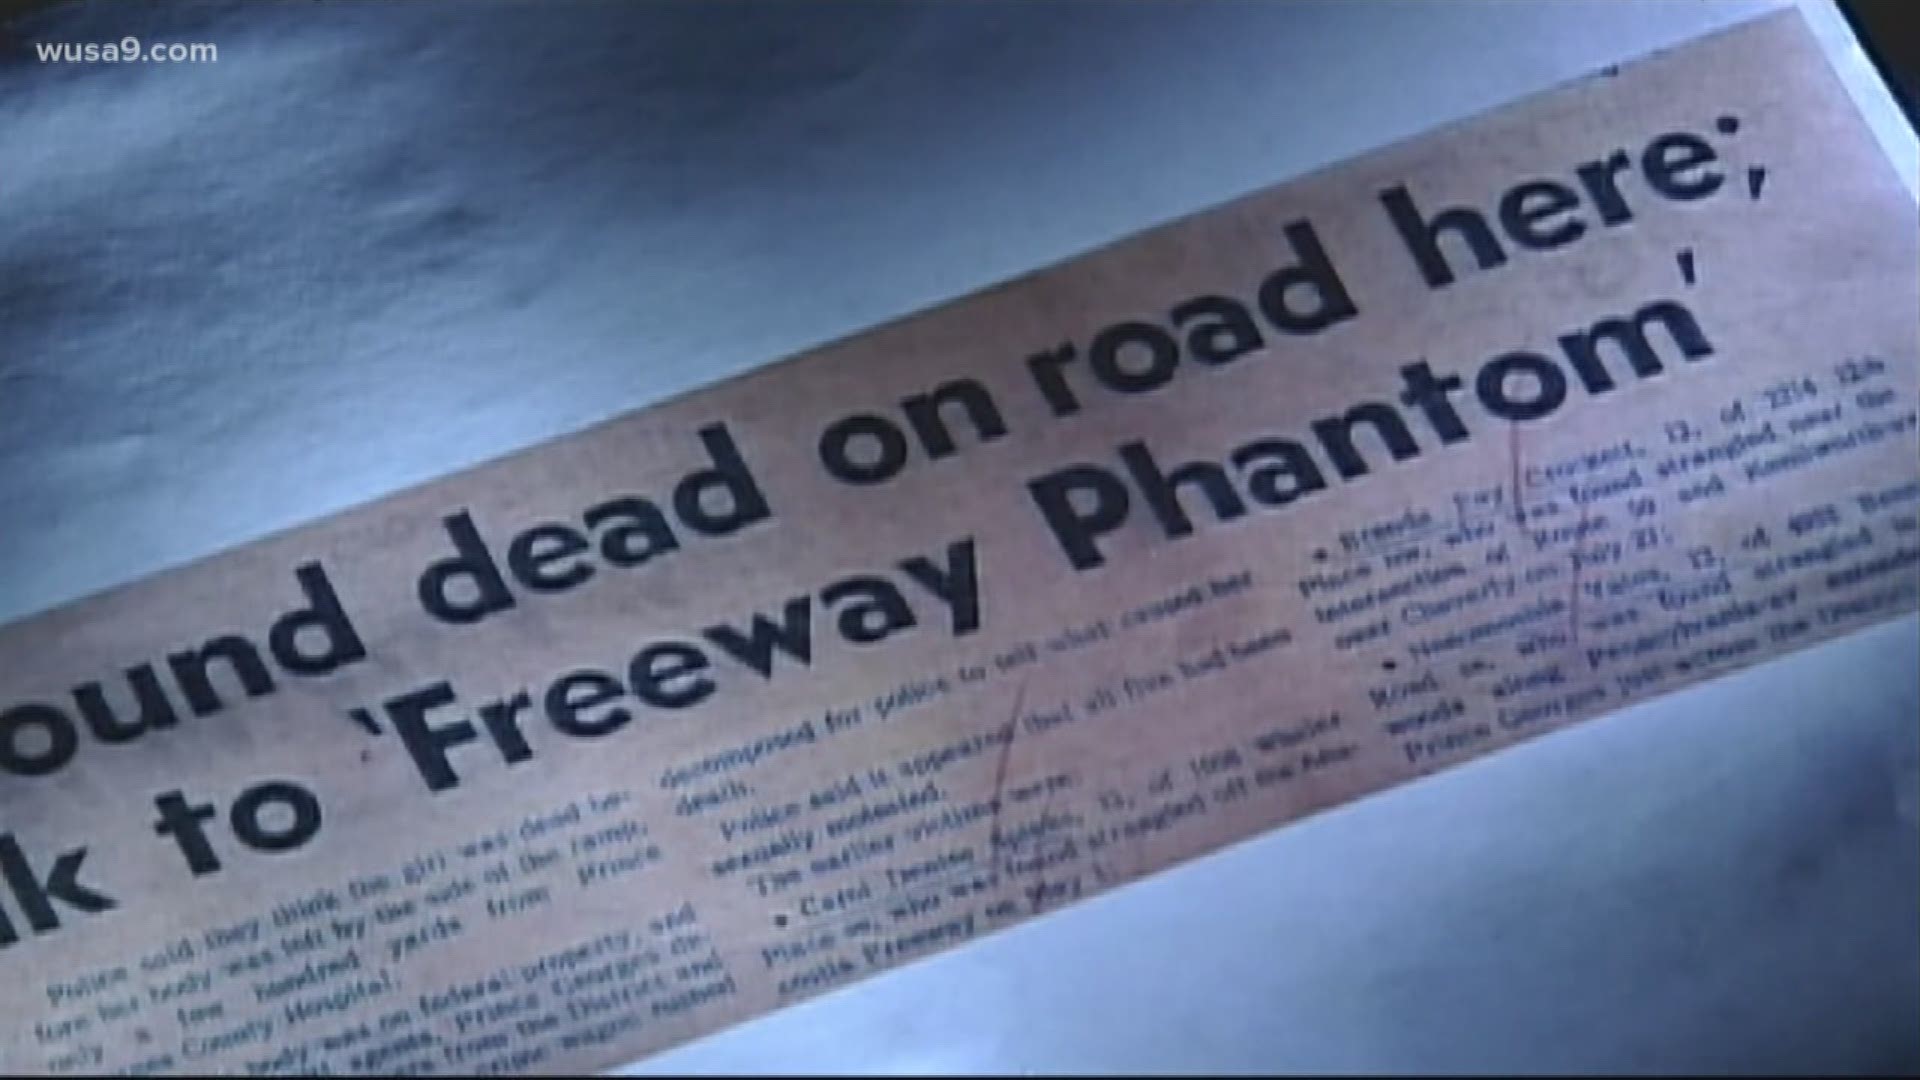 "Tantamount: The Pursuit of the Freeway Phantom Serial Killer" has new clues in the search for a man who has so far escaped justice.